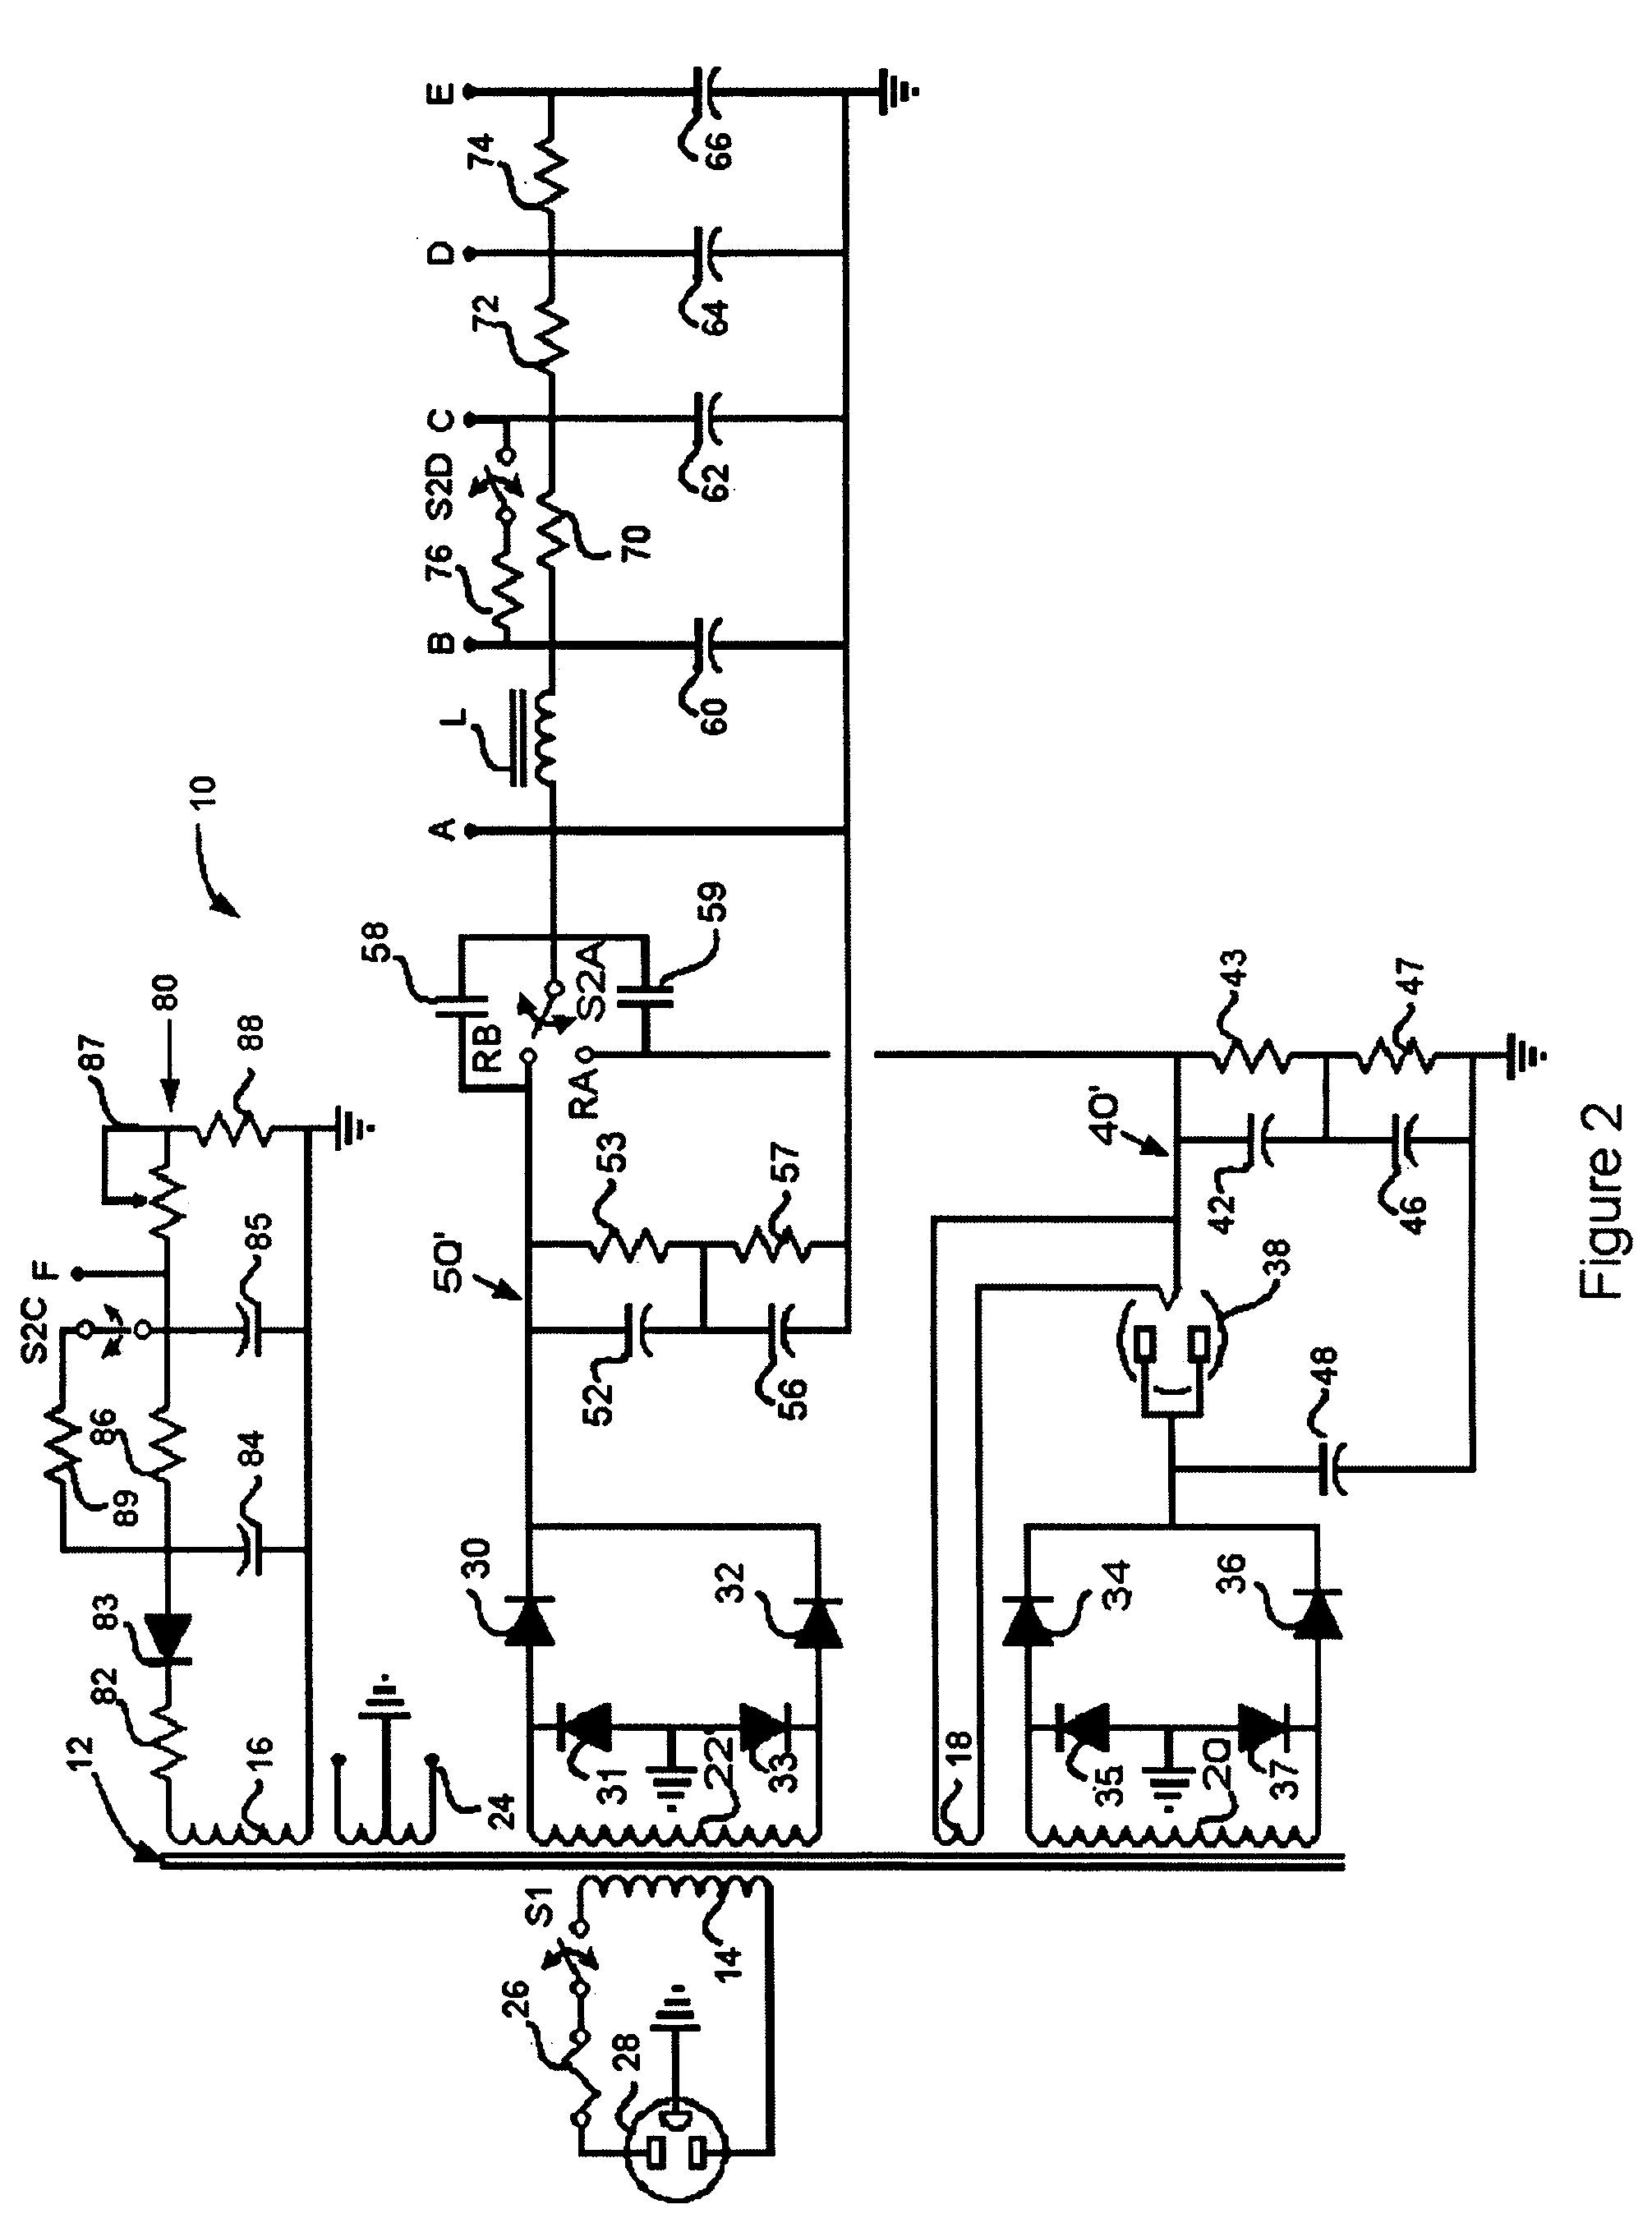 Selectable power supply for audio amplifier